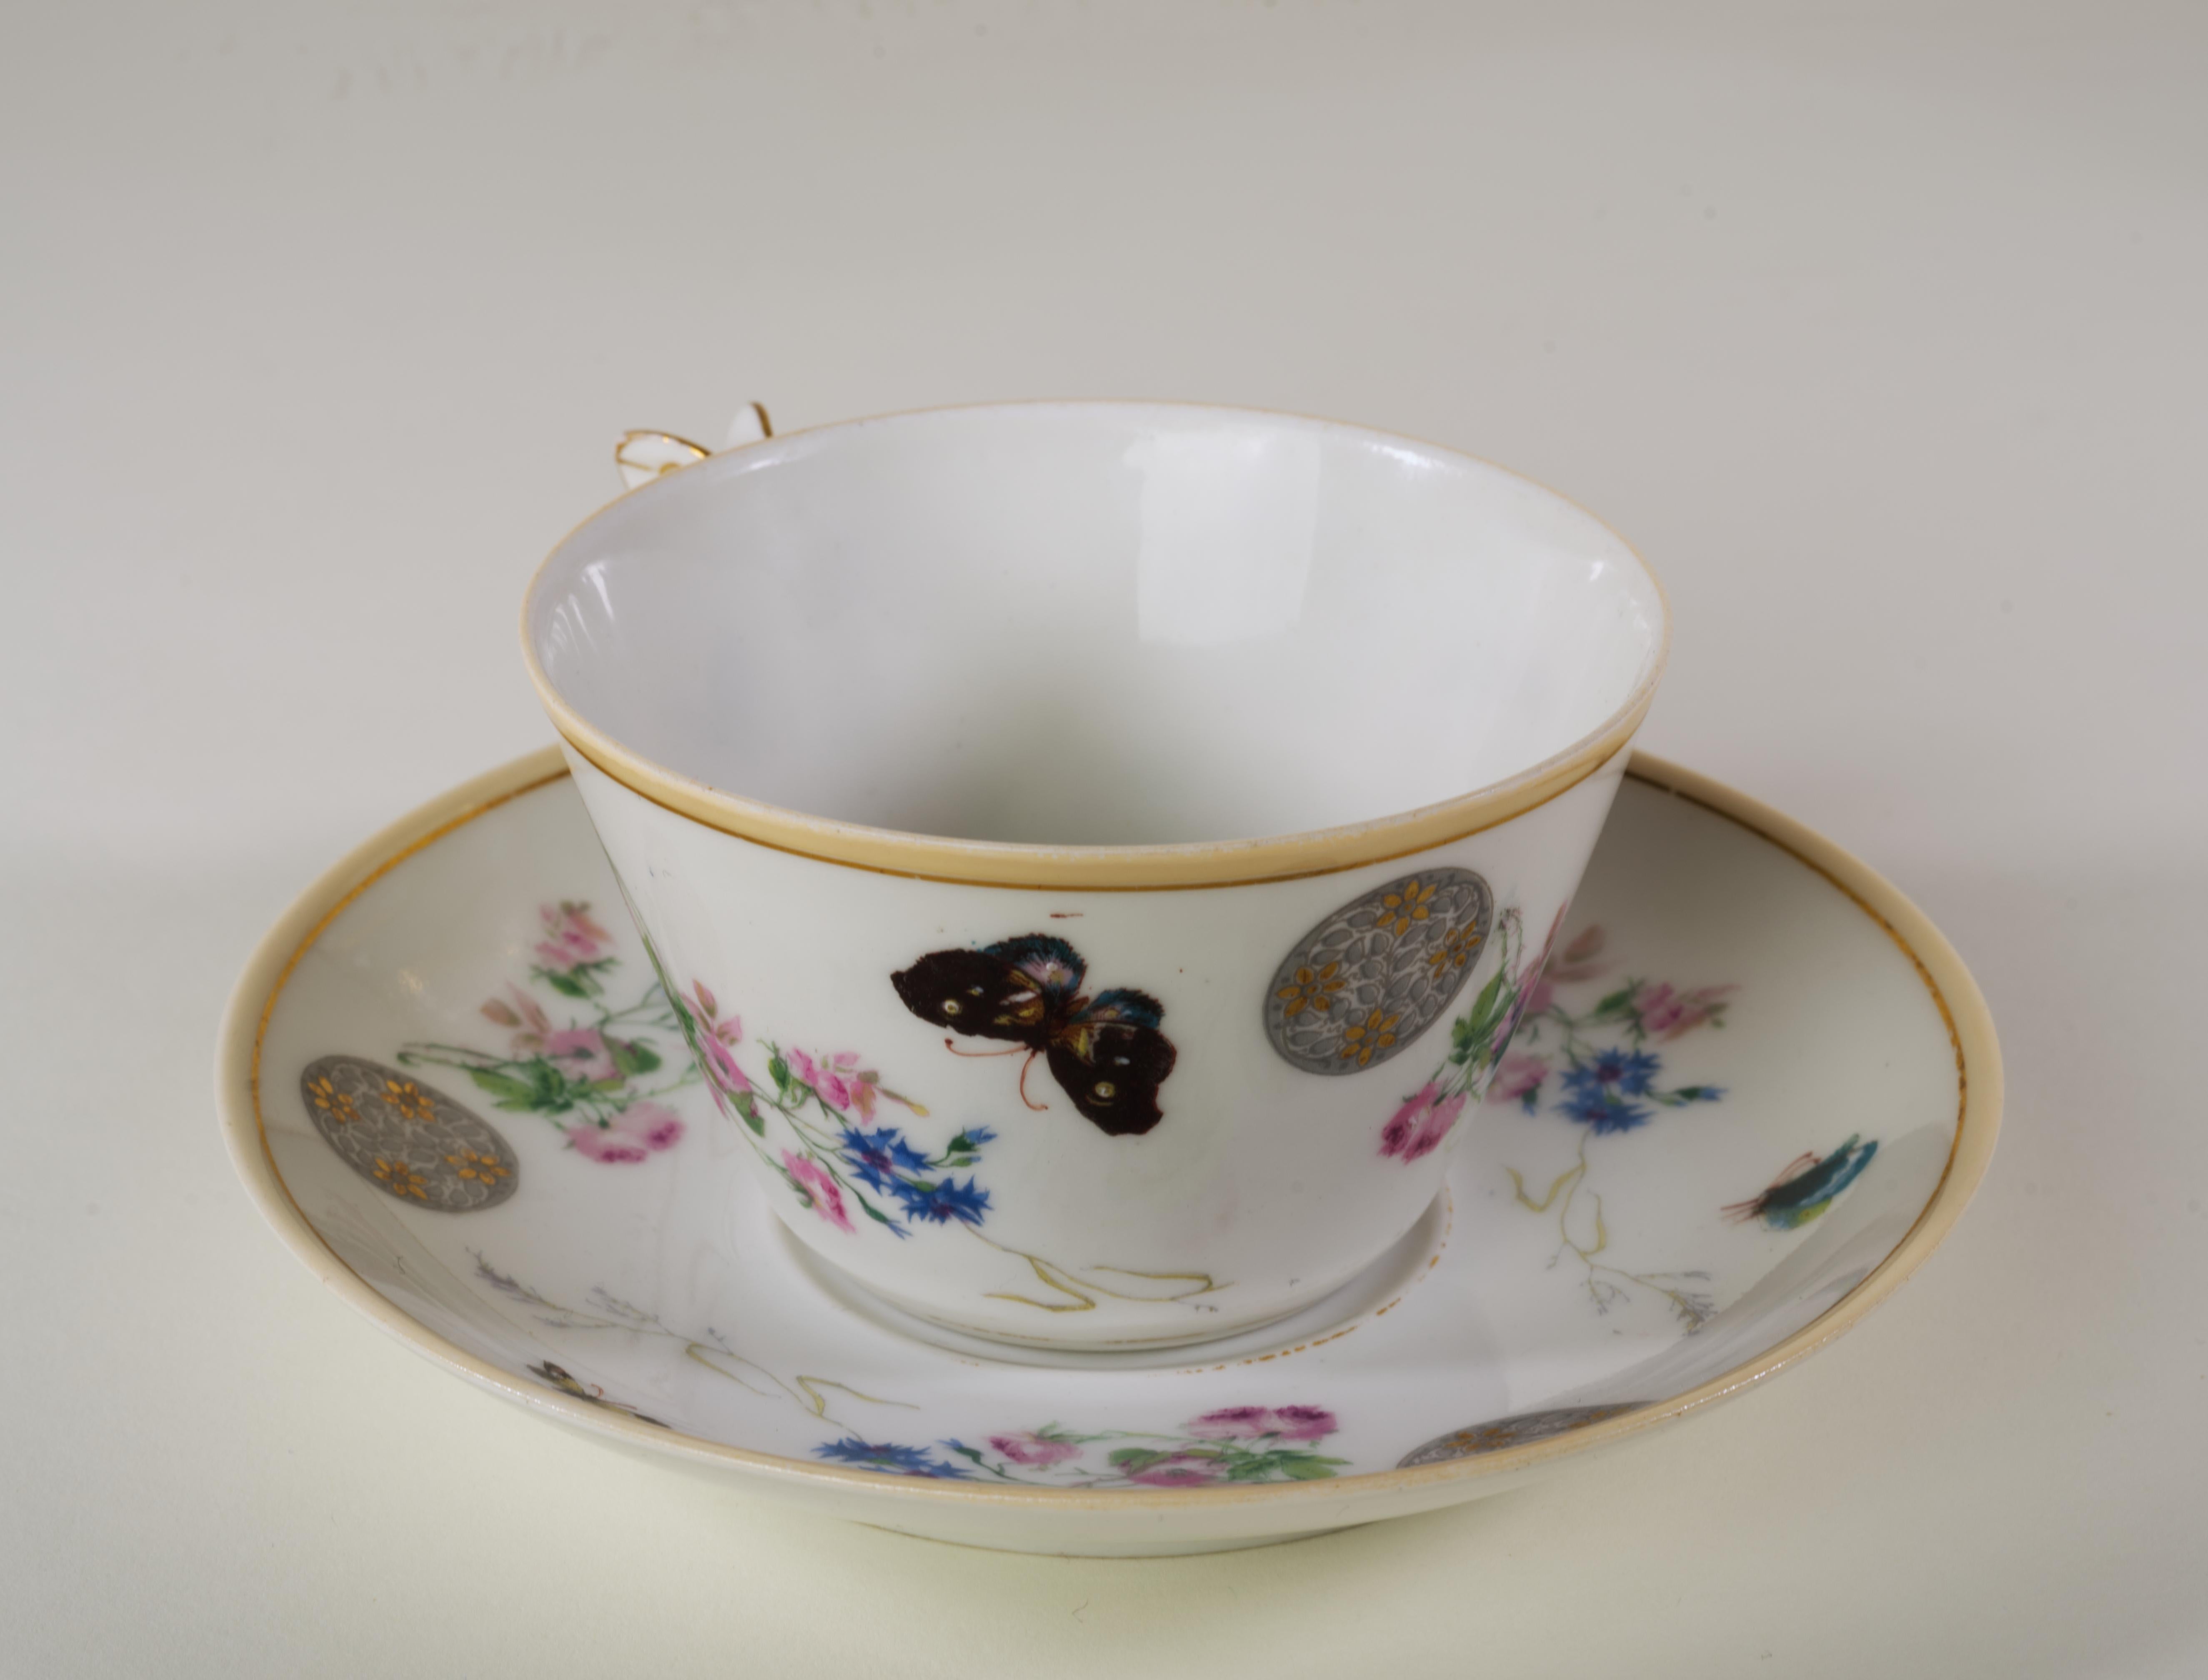 Haviland Limoges Butterfly Handled Cup and saucer set, 1879-1889, Aesthetic  In Good Condition For Sale In Clifton Springs, NY